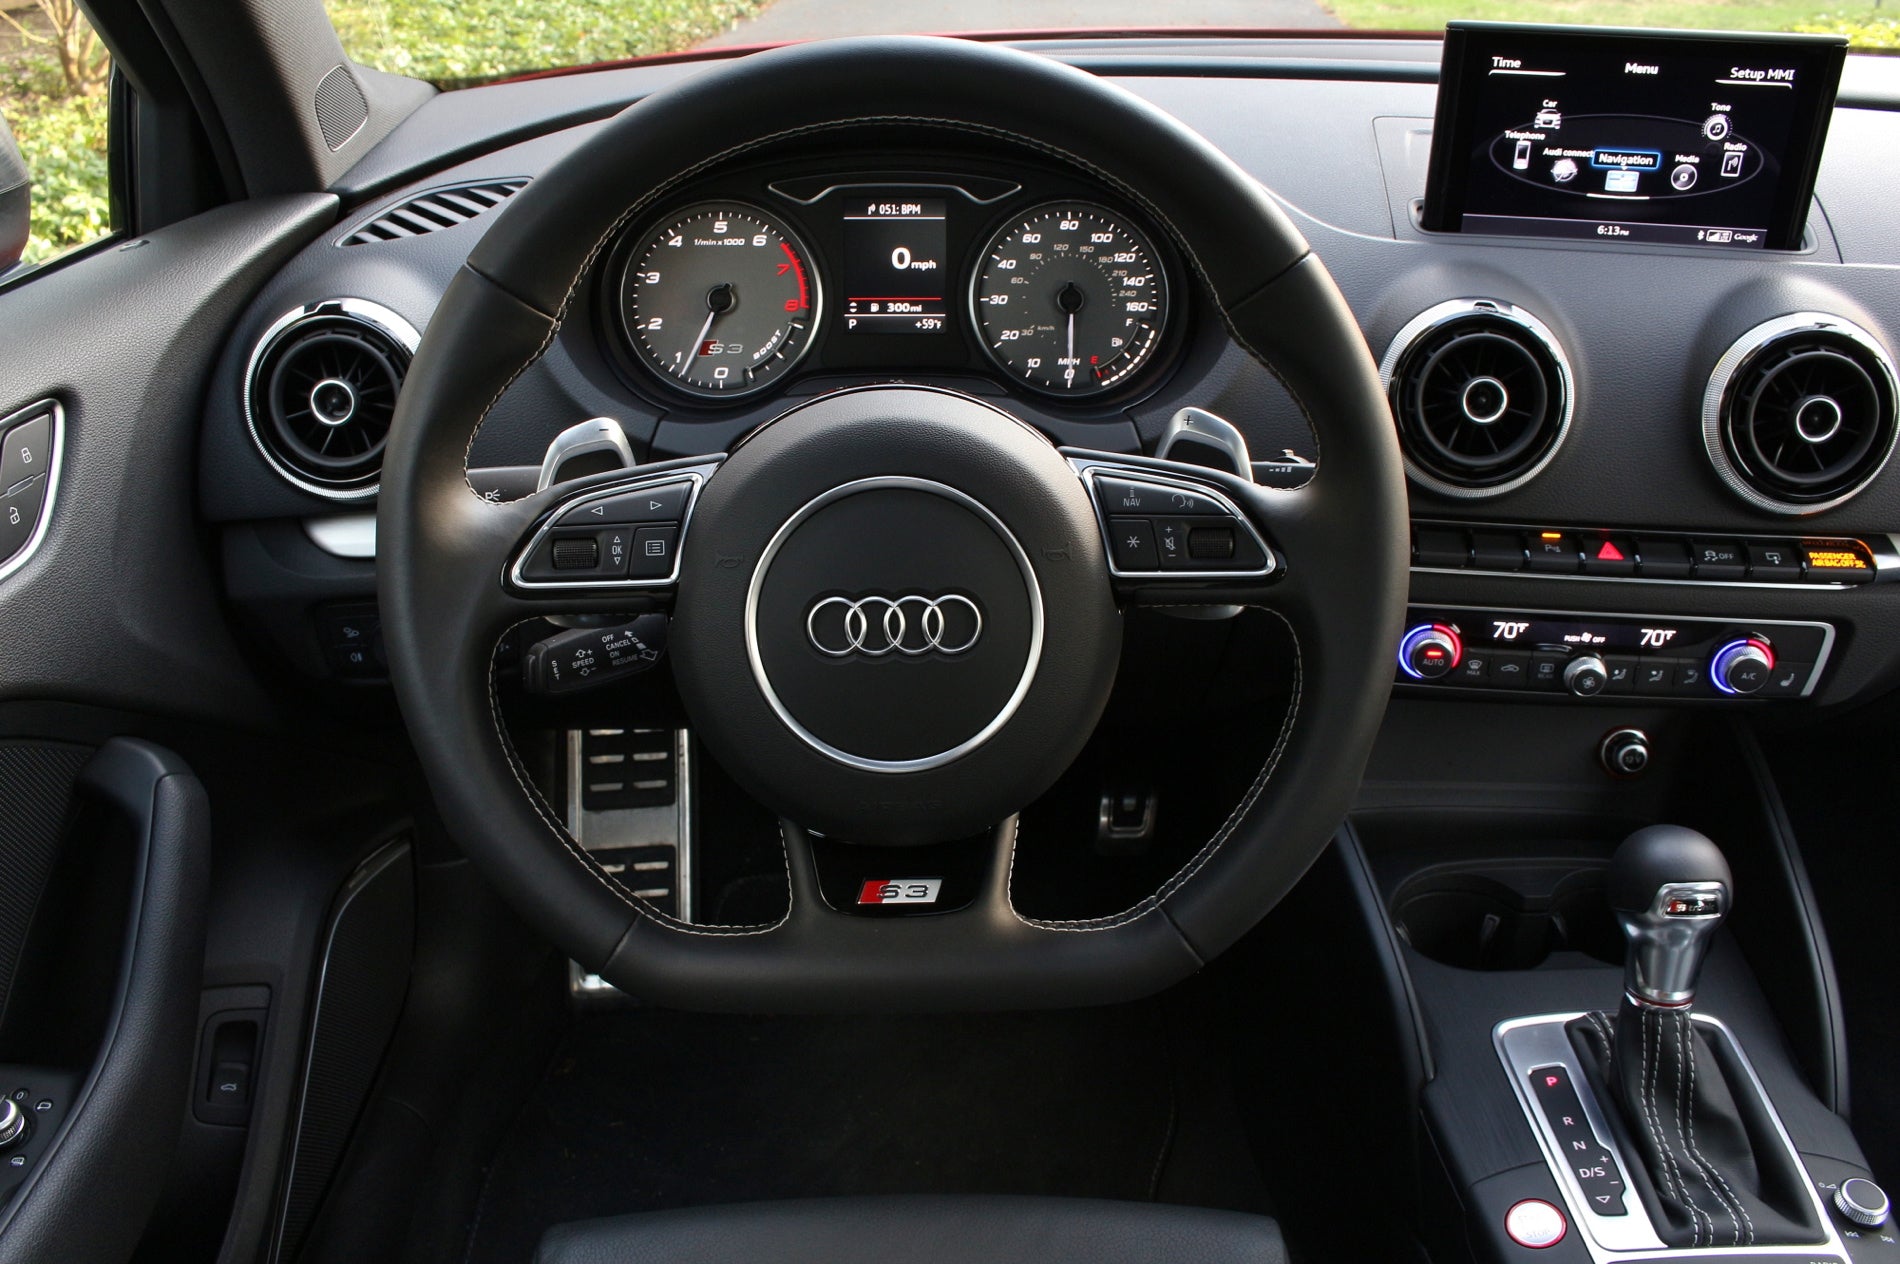 How to use paddle shifters in Audi 